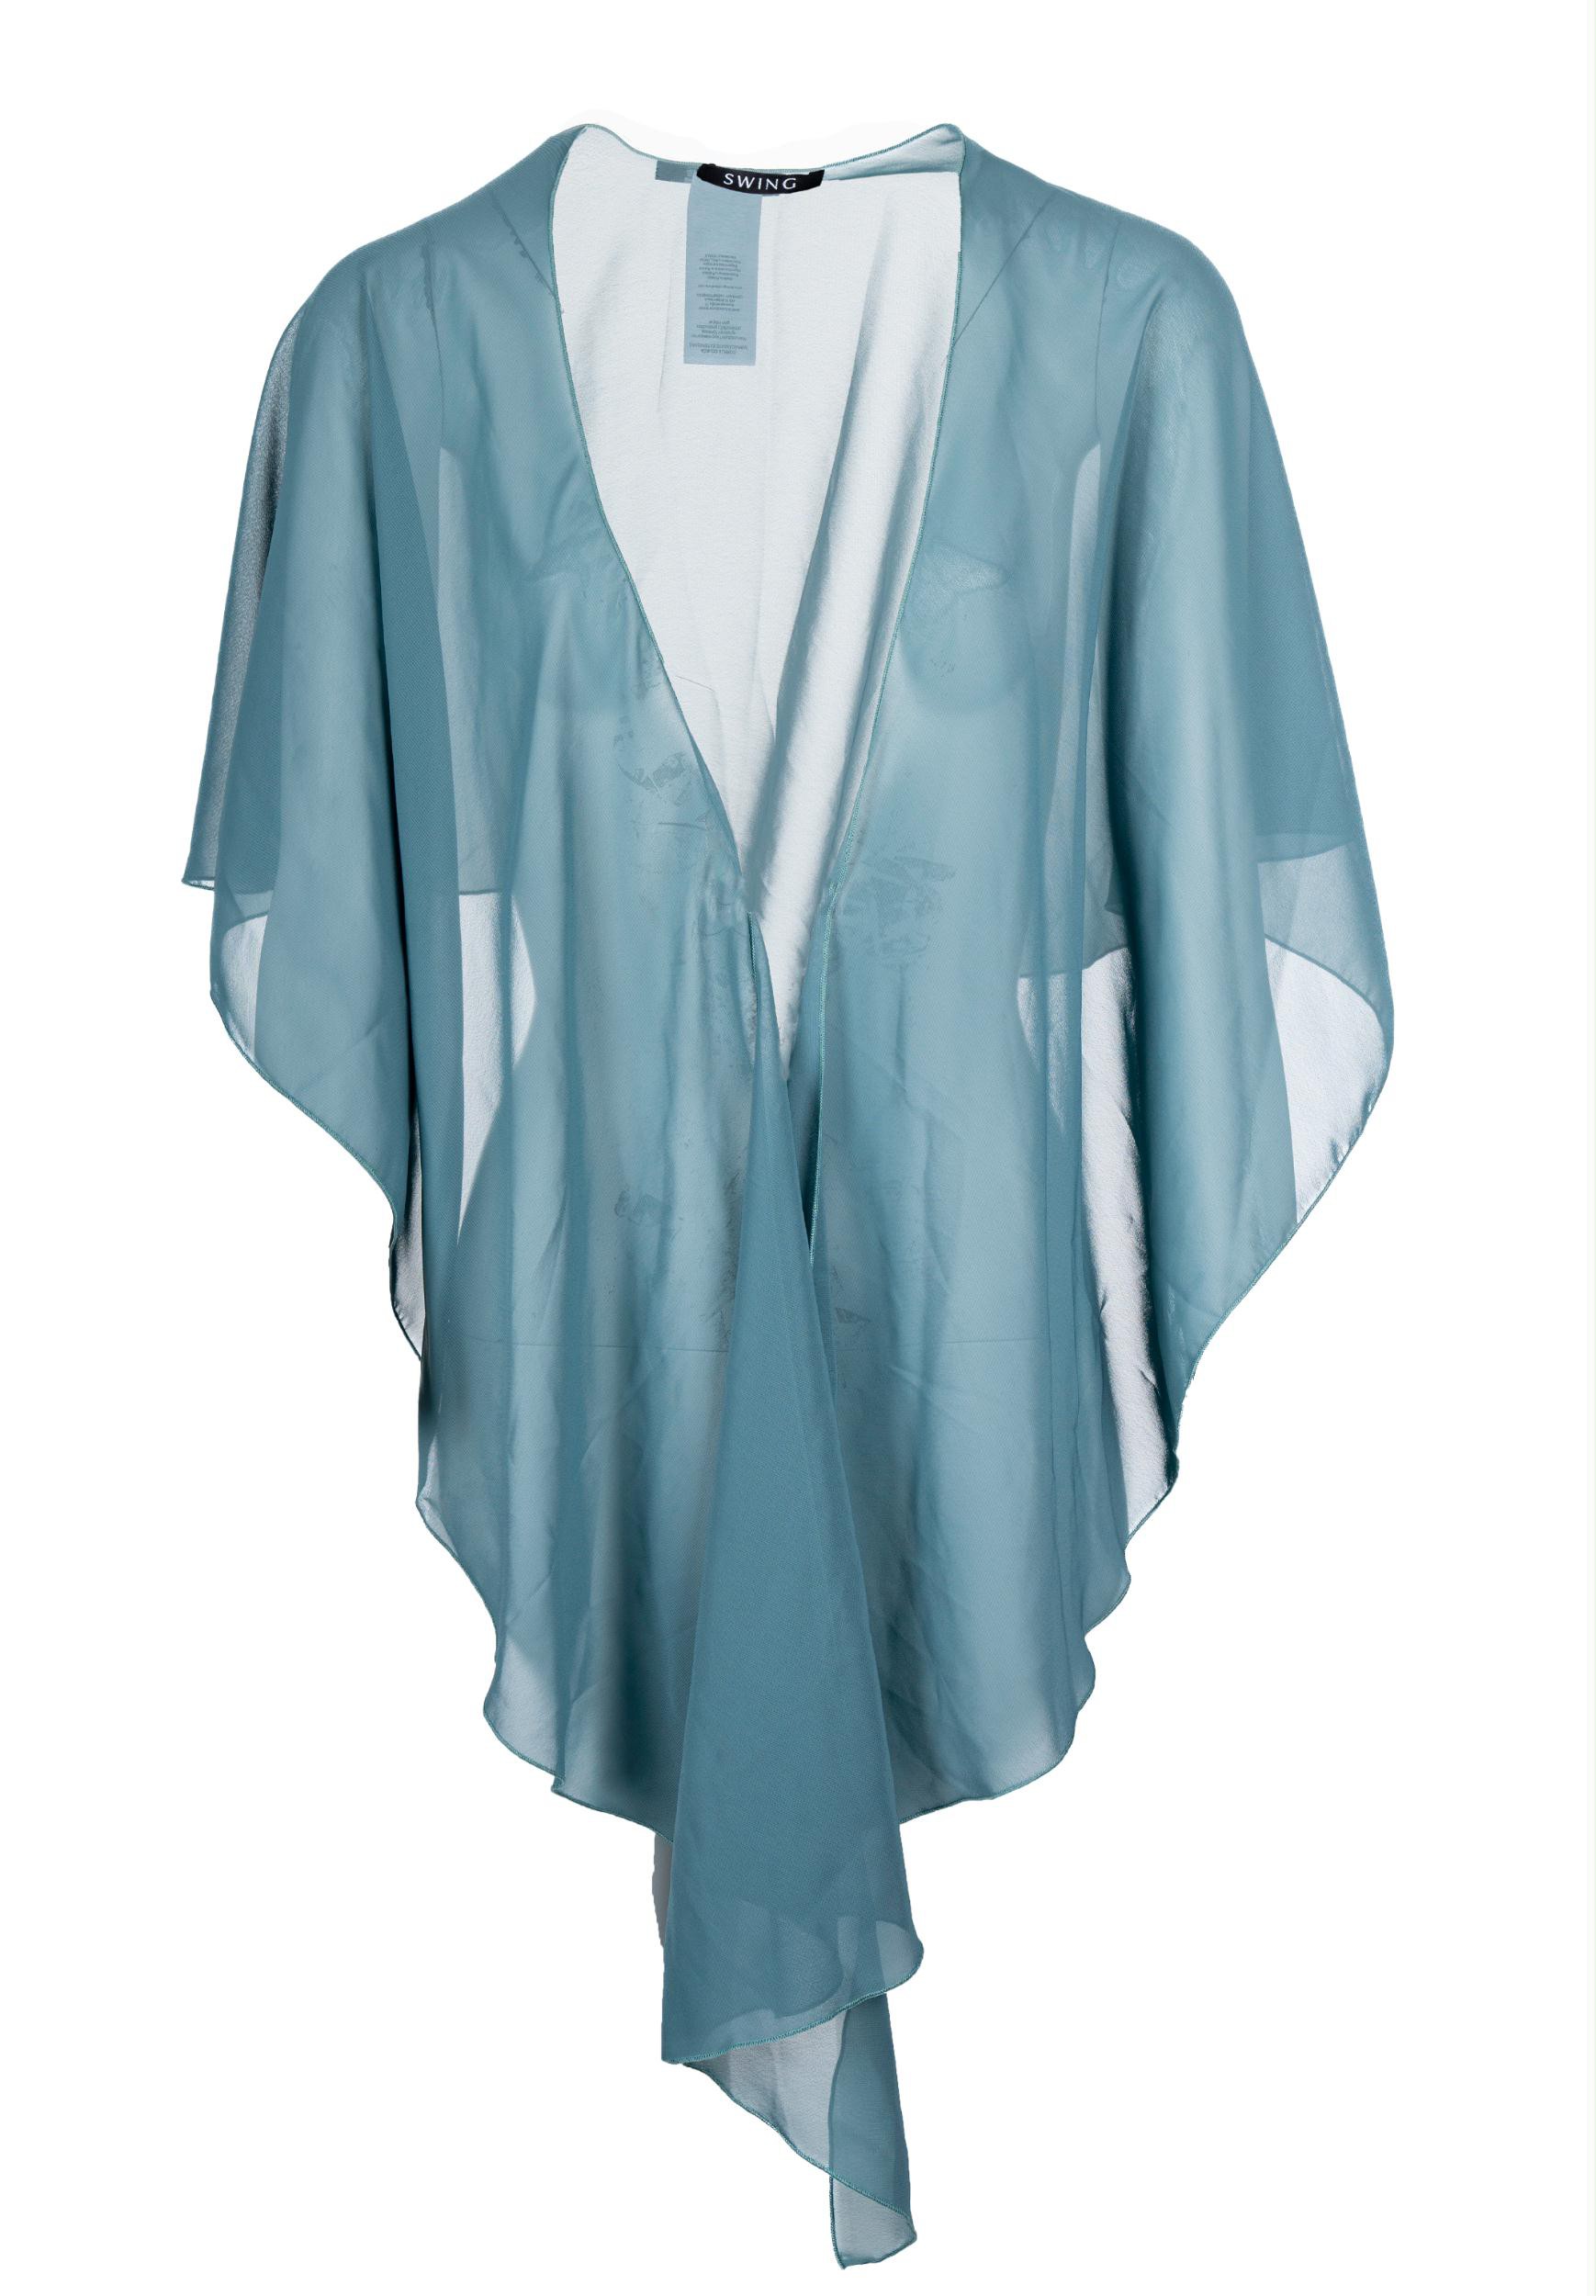 Philadelphia halfrond Bot Poncho groen | Rosedale Collections